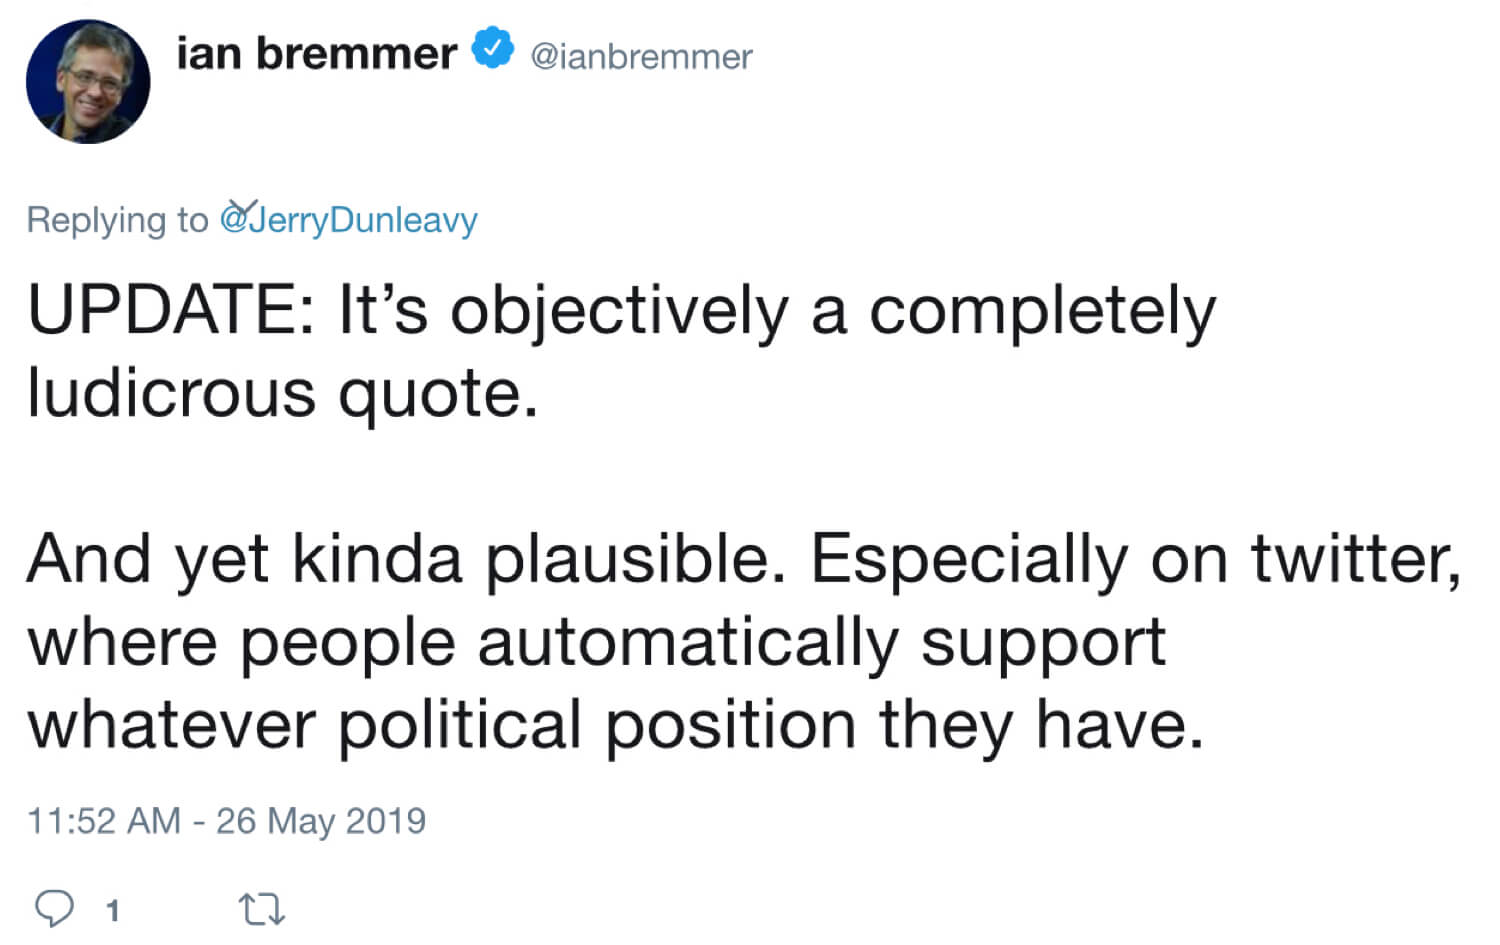 An archived tweet from Ian Bremmer admitting that the Trump quote is fabricated.